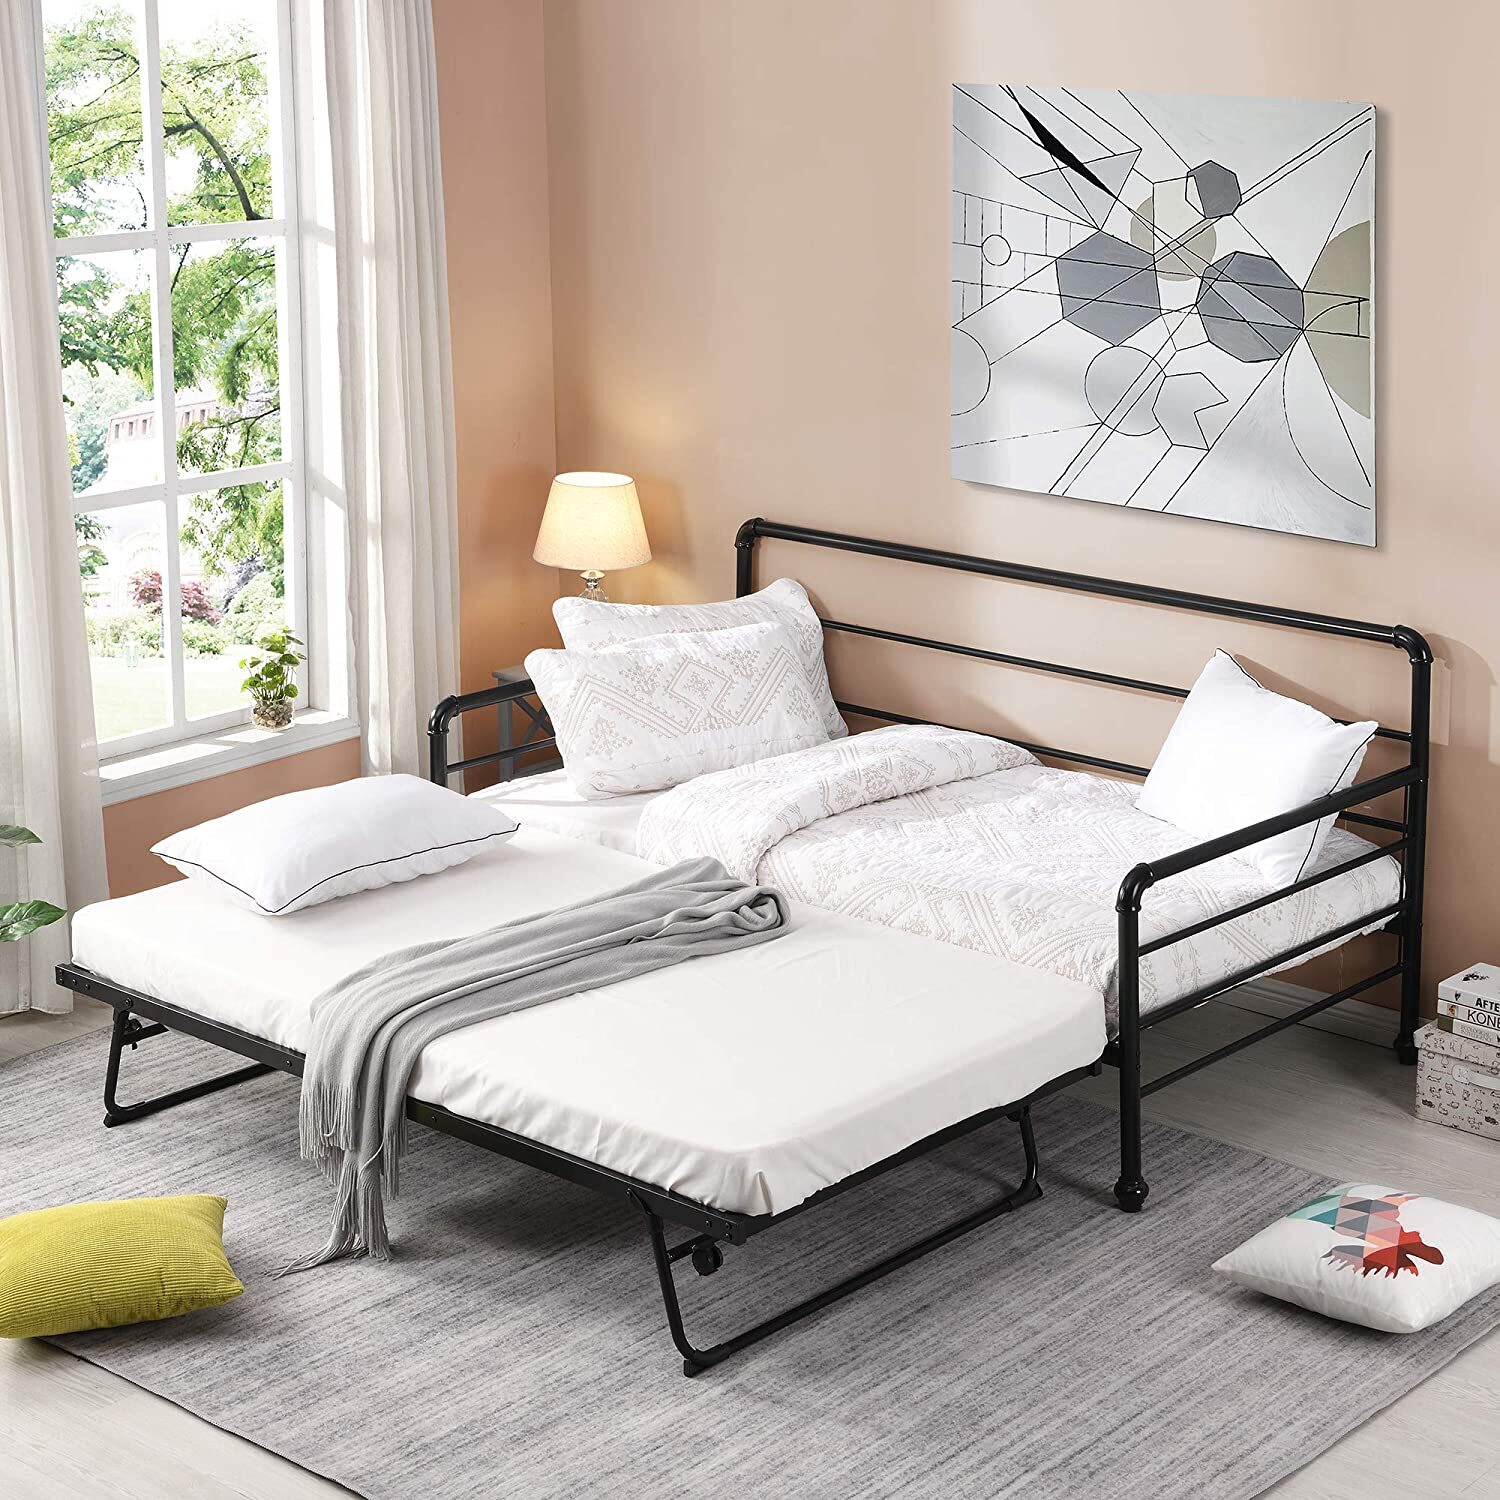 Polibi Metal Daybed